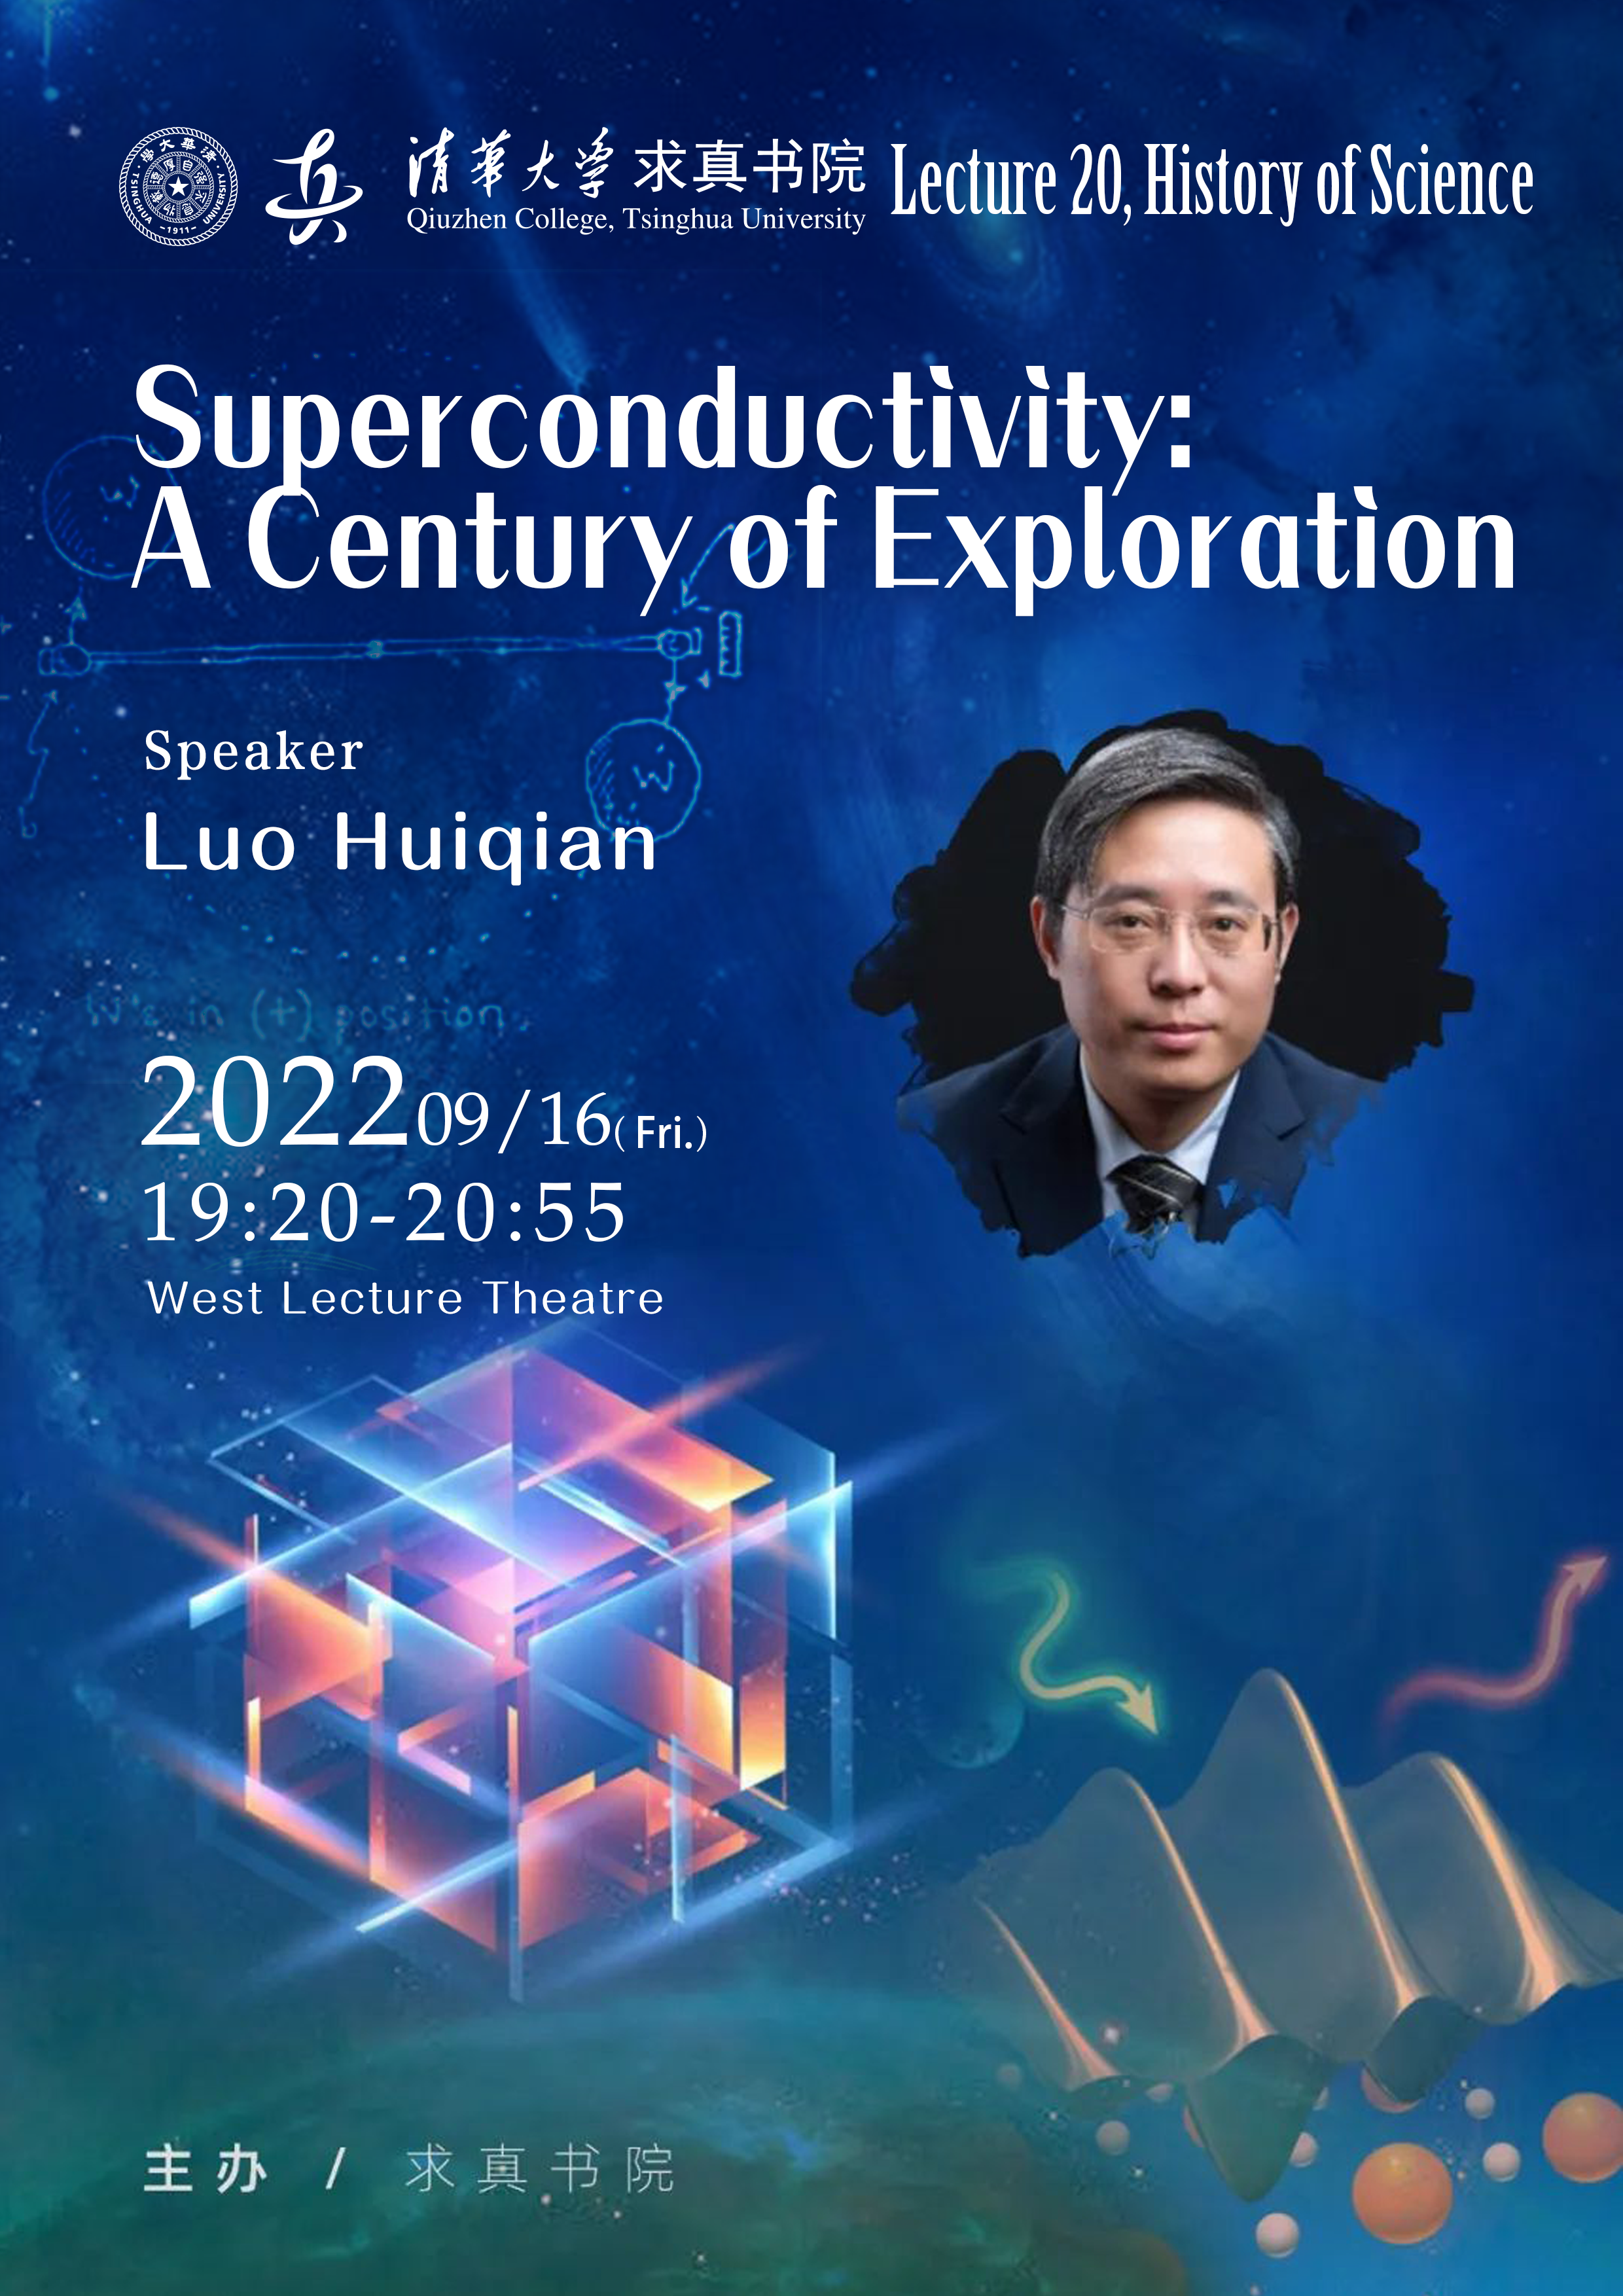 Lectures on History of Science – Lecture 20: Superconductivity: A Century of Exploration